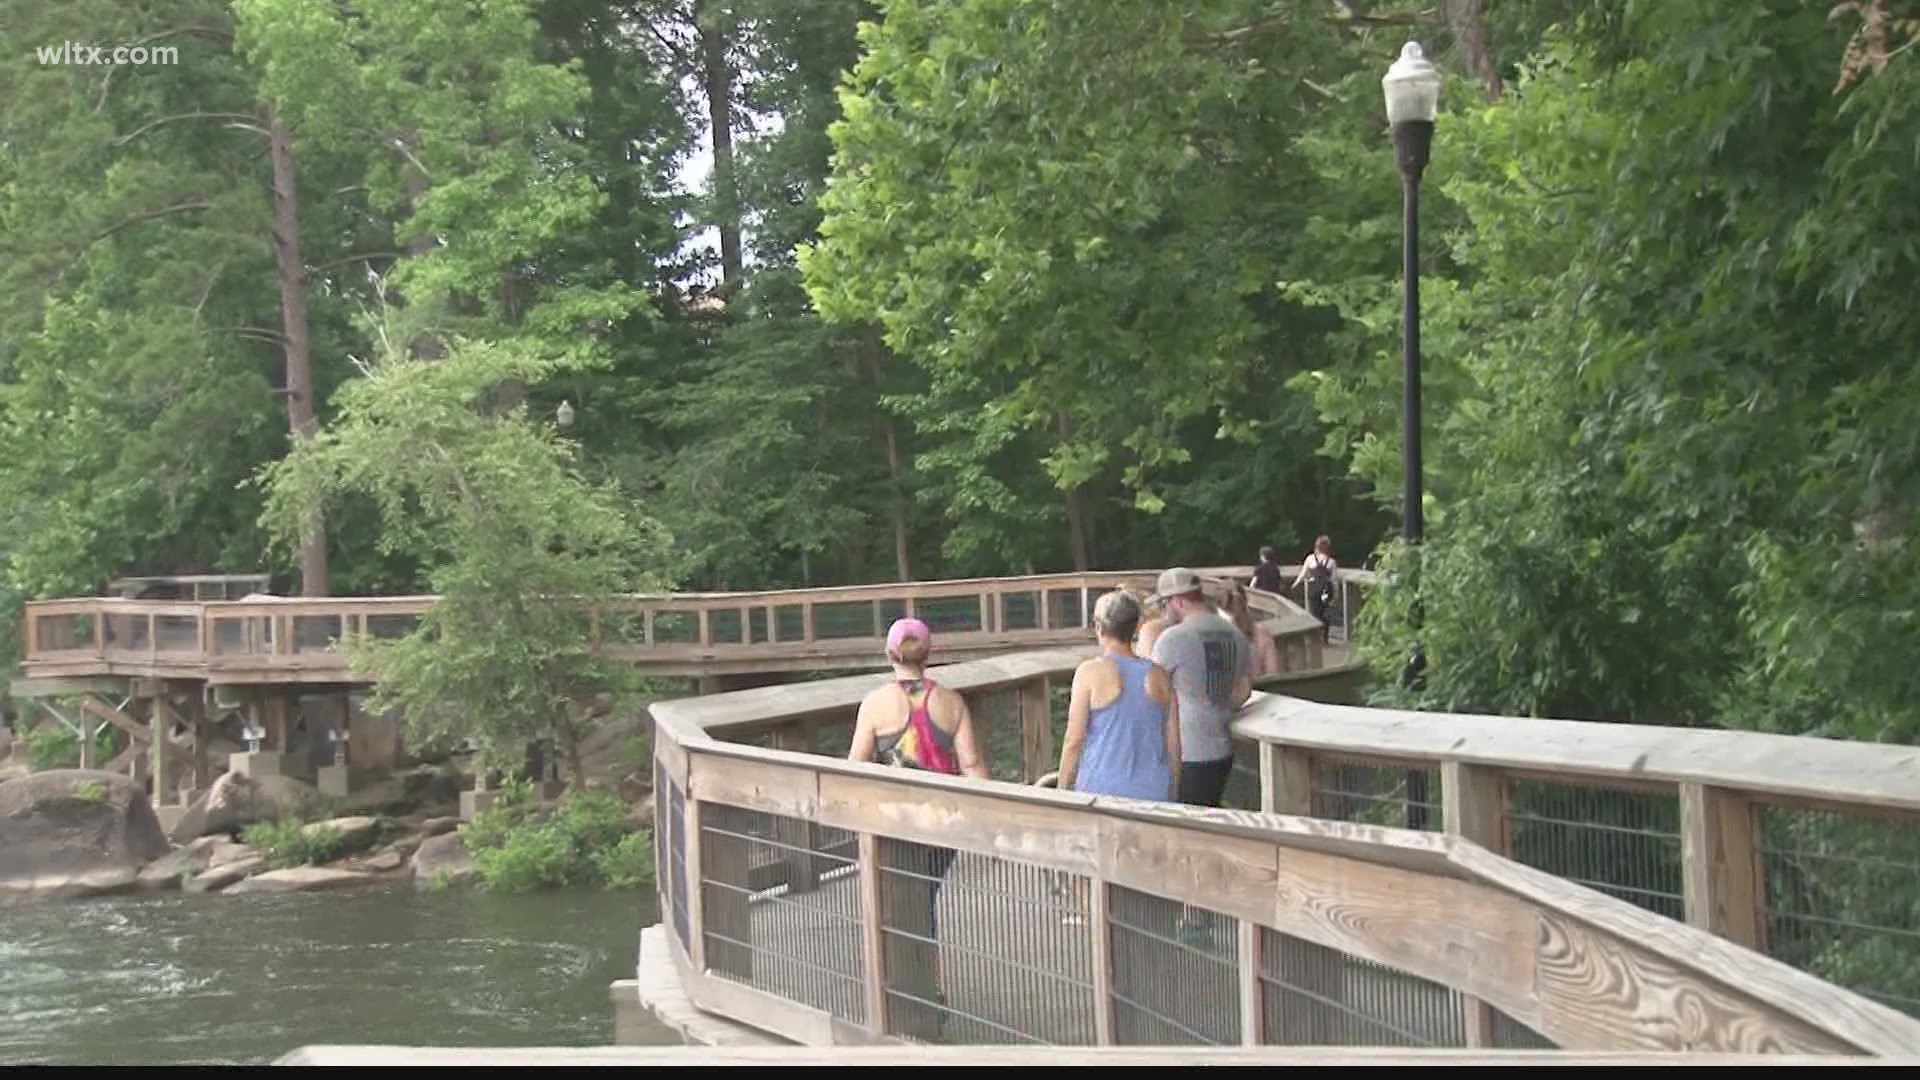 On Saturday, the riverwalk had it's soft opening for people to walk on the three mile boardwalk along the river.